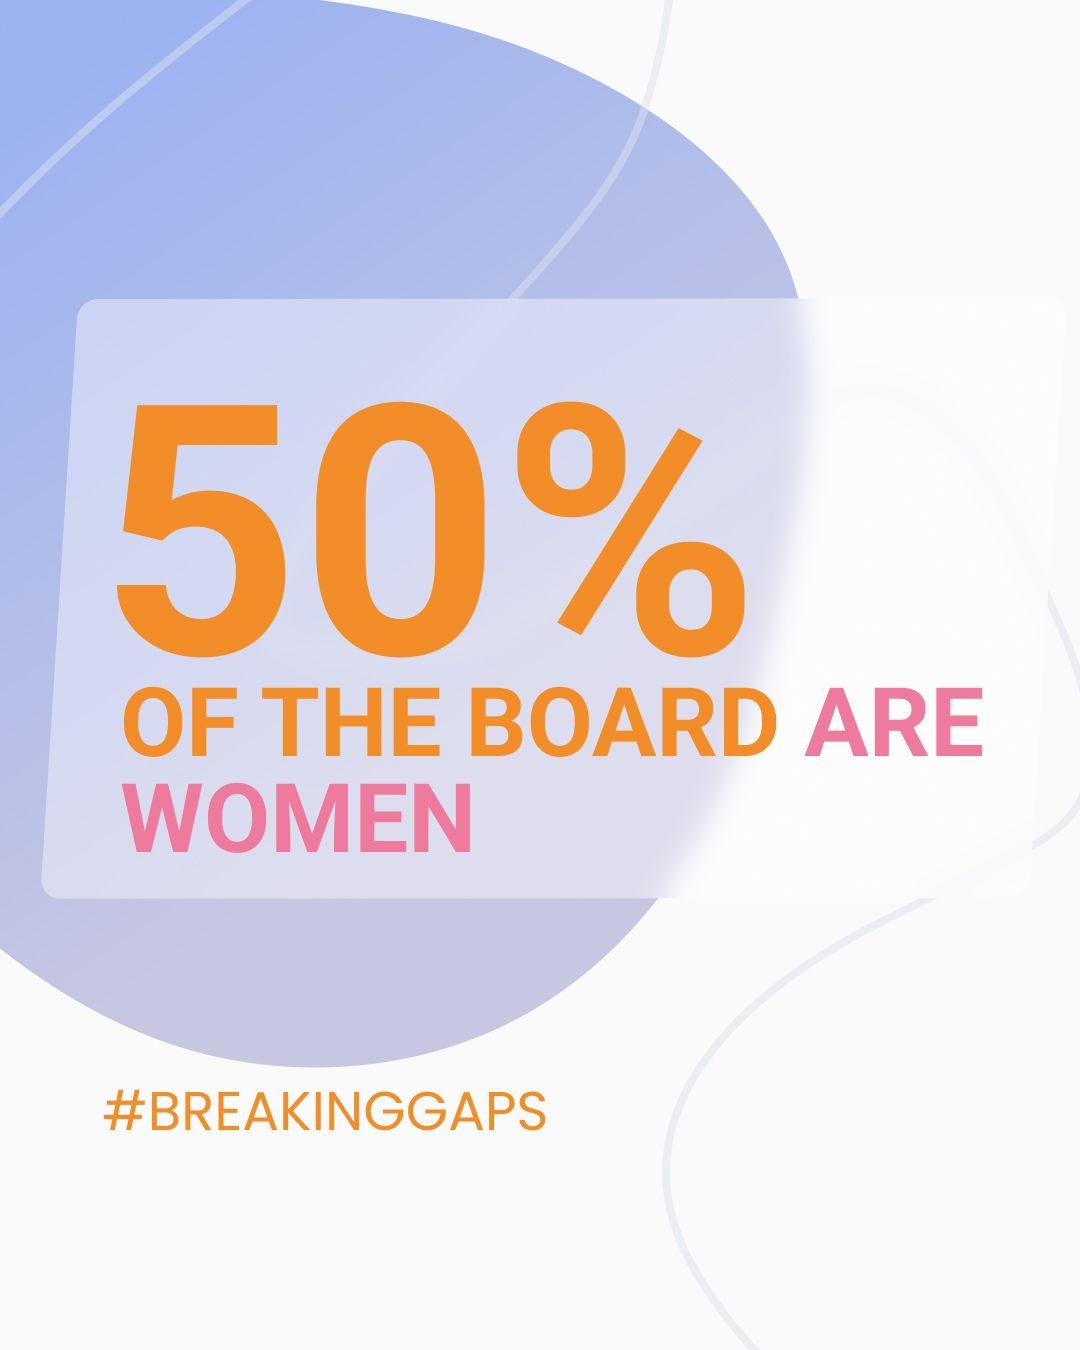 50% of the board are women